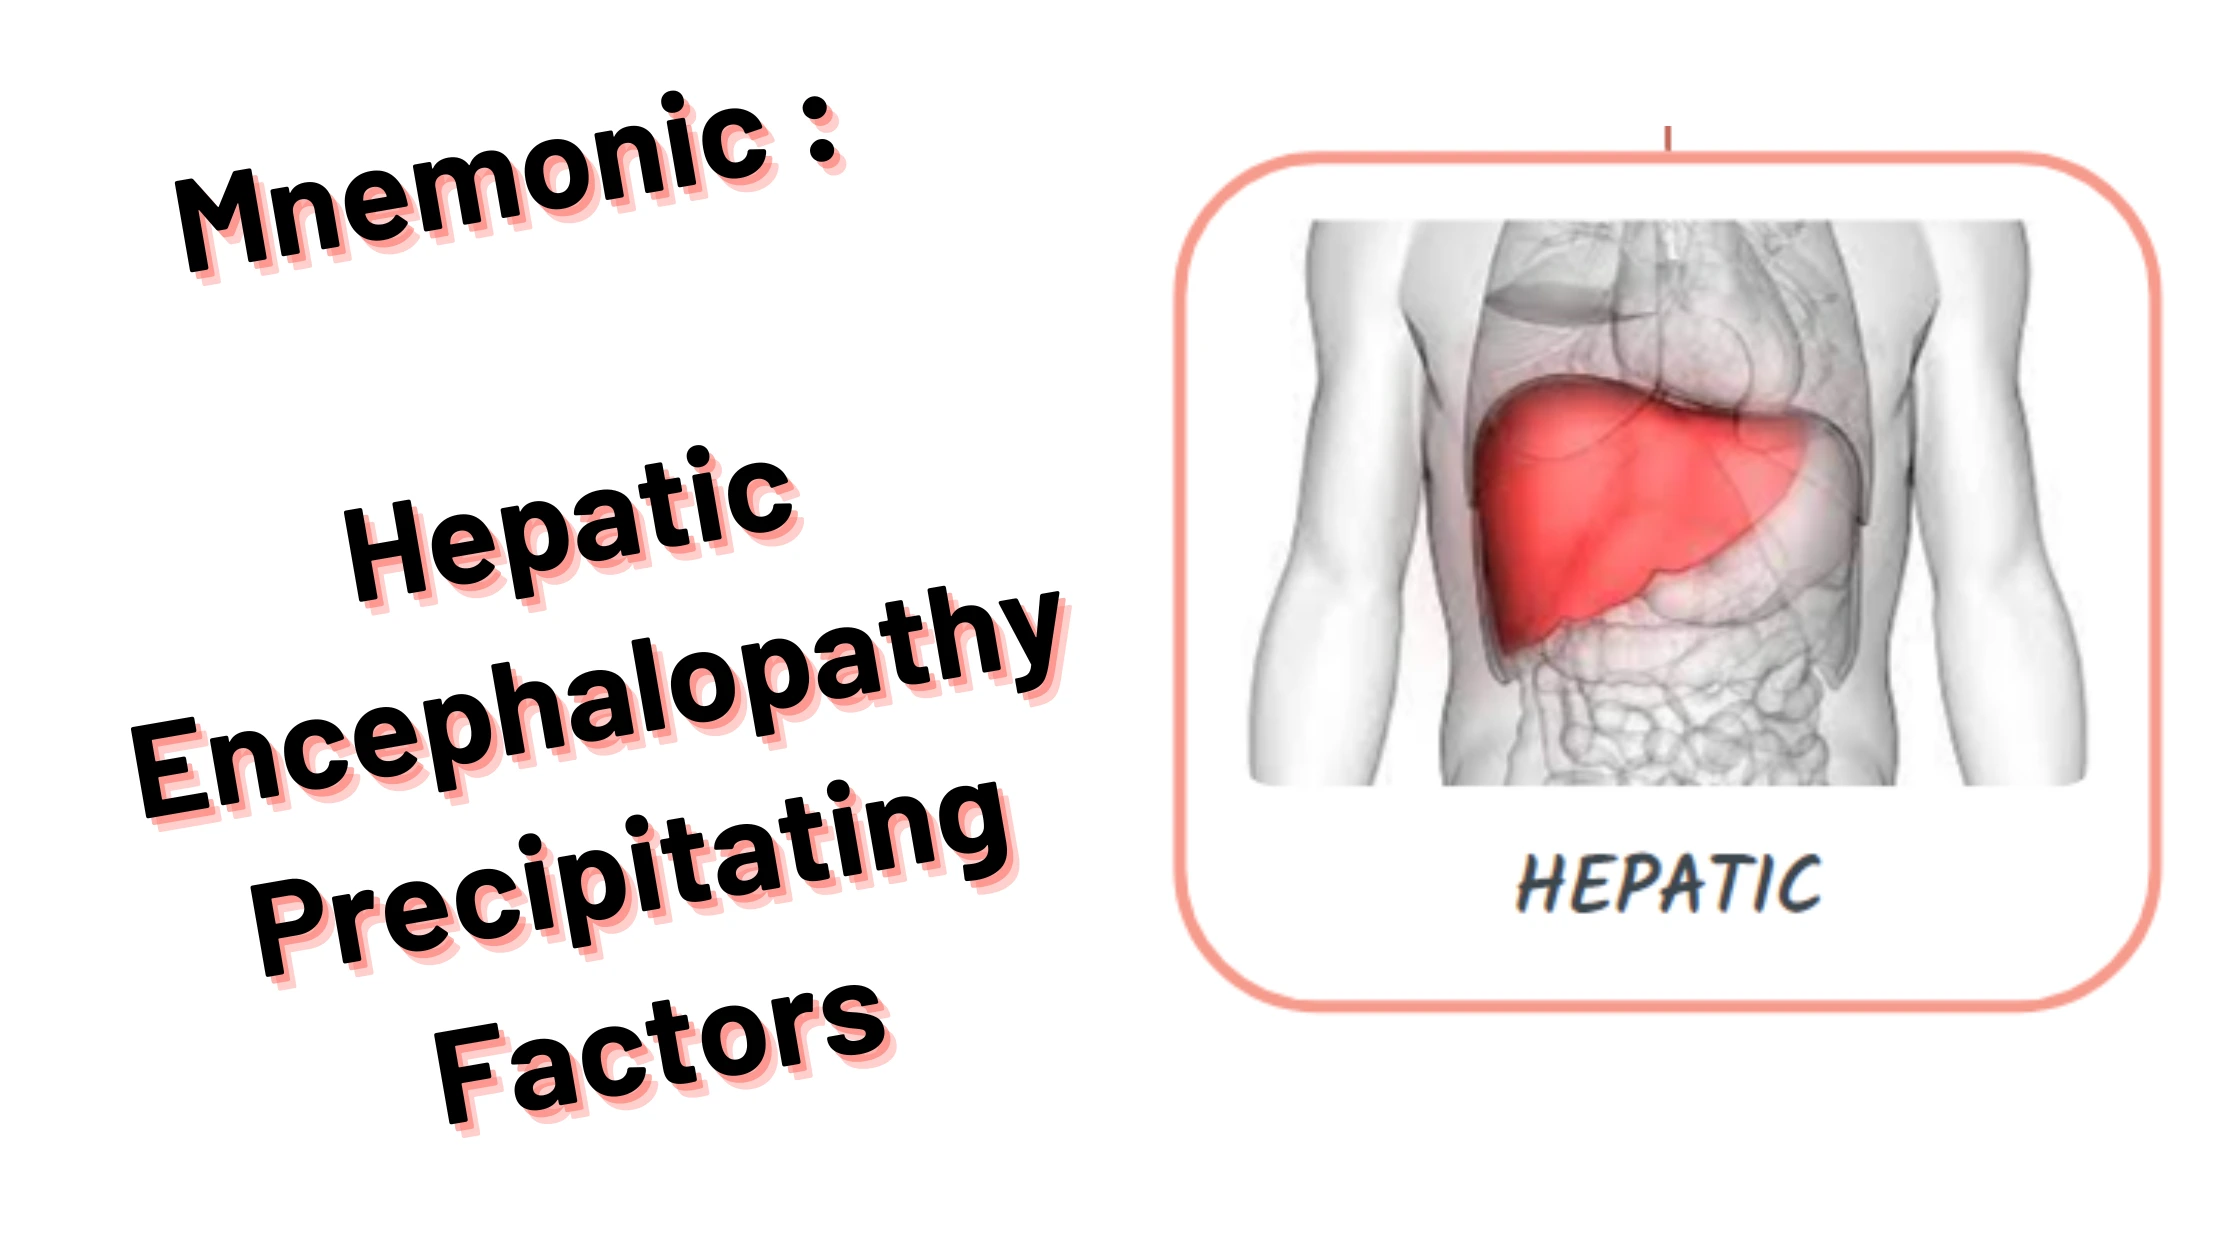 You are currently viewing [Very Cool] Mnemonic : Hepatic Encephalopathy Precipitating Factors